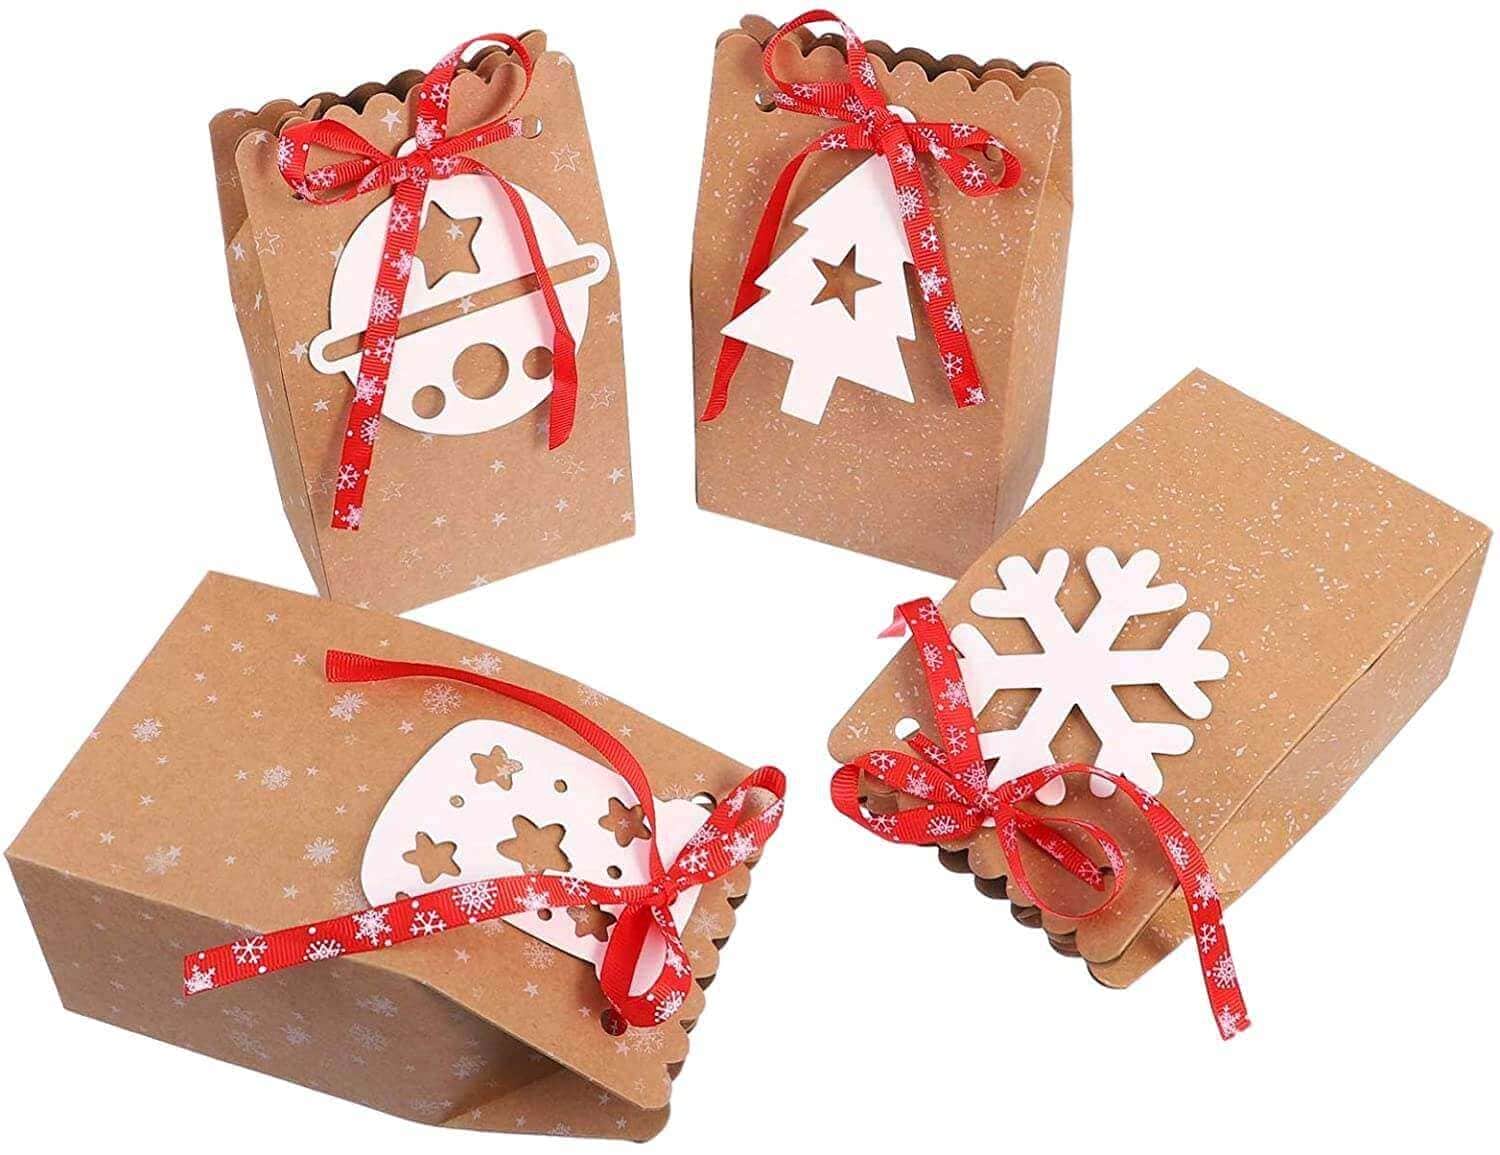 TOYANDONA 12pcs Christmas Kraft Paper Bags Xmas Large Kraft Candy Bags Biscuit Goodies Storage Boxes Gift Bags for Party